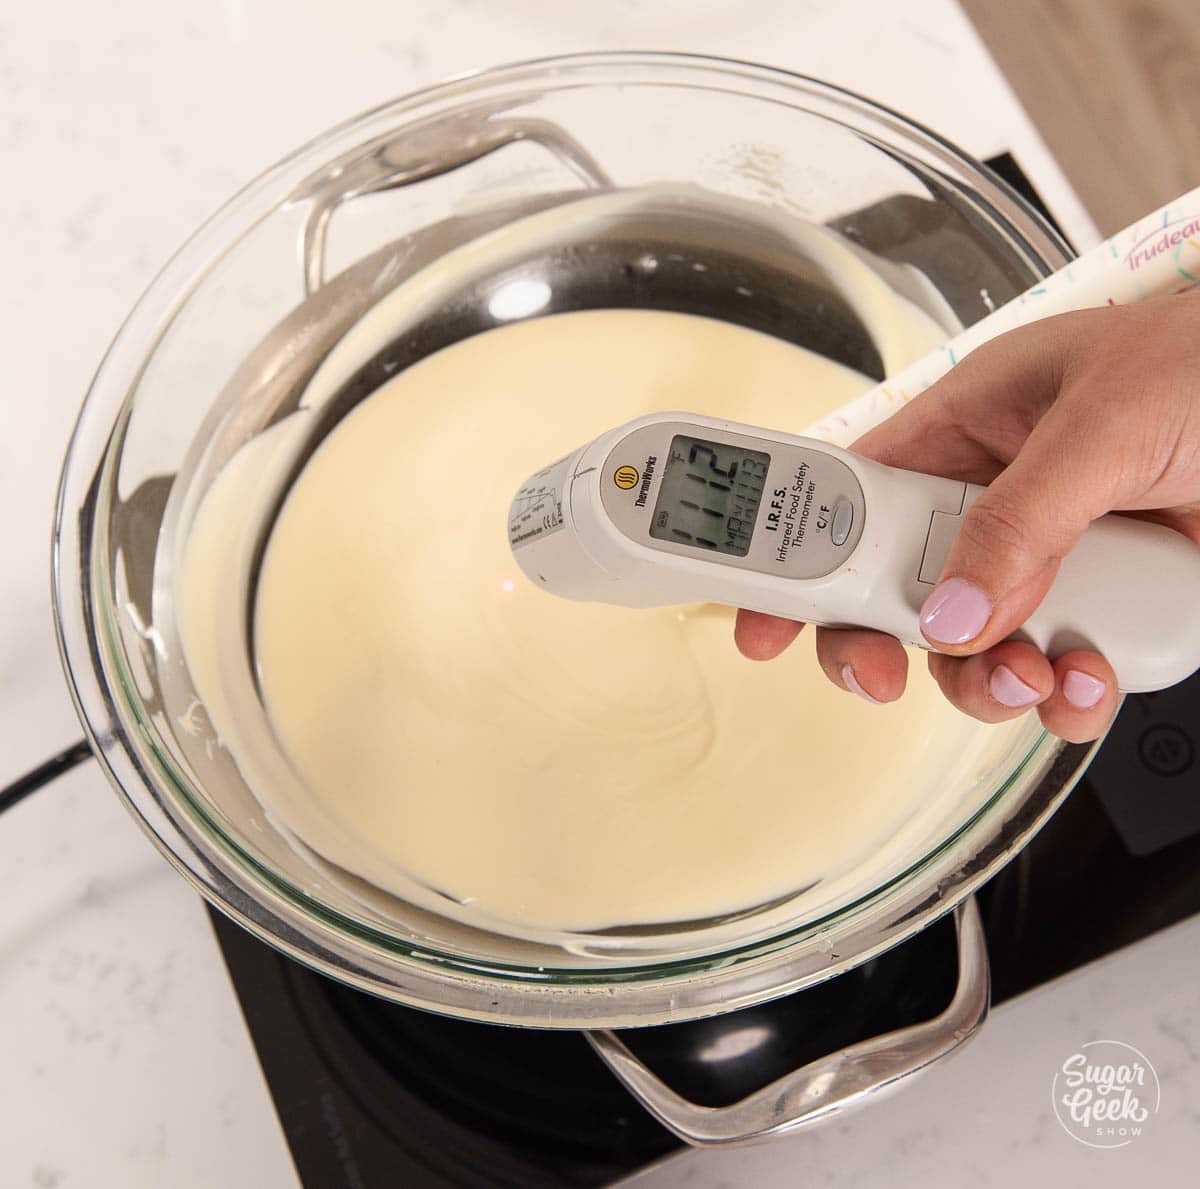 infrared thermometer held in hand over melted chocolate